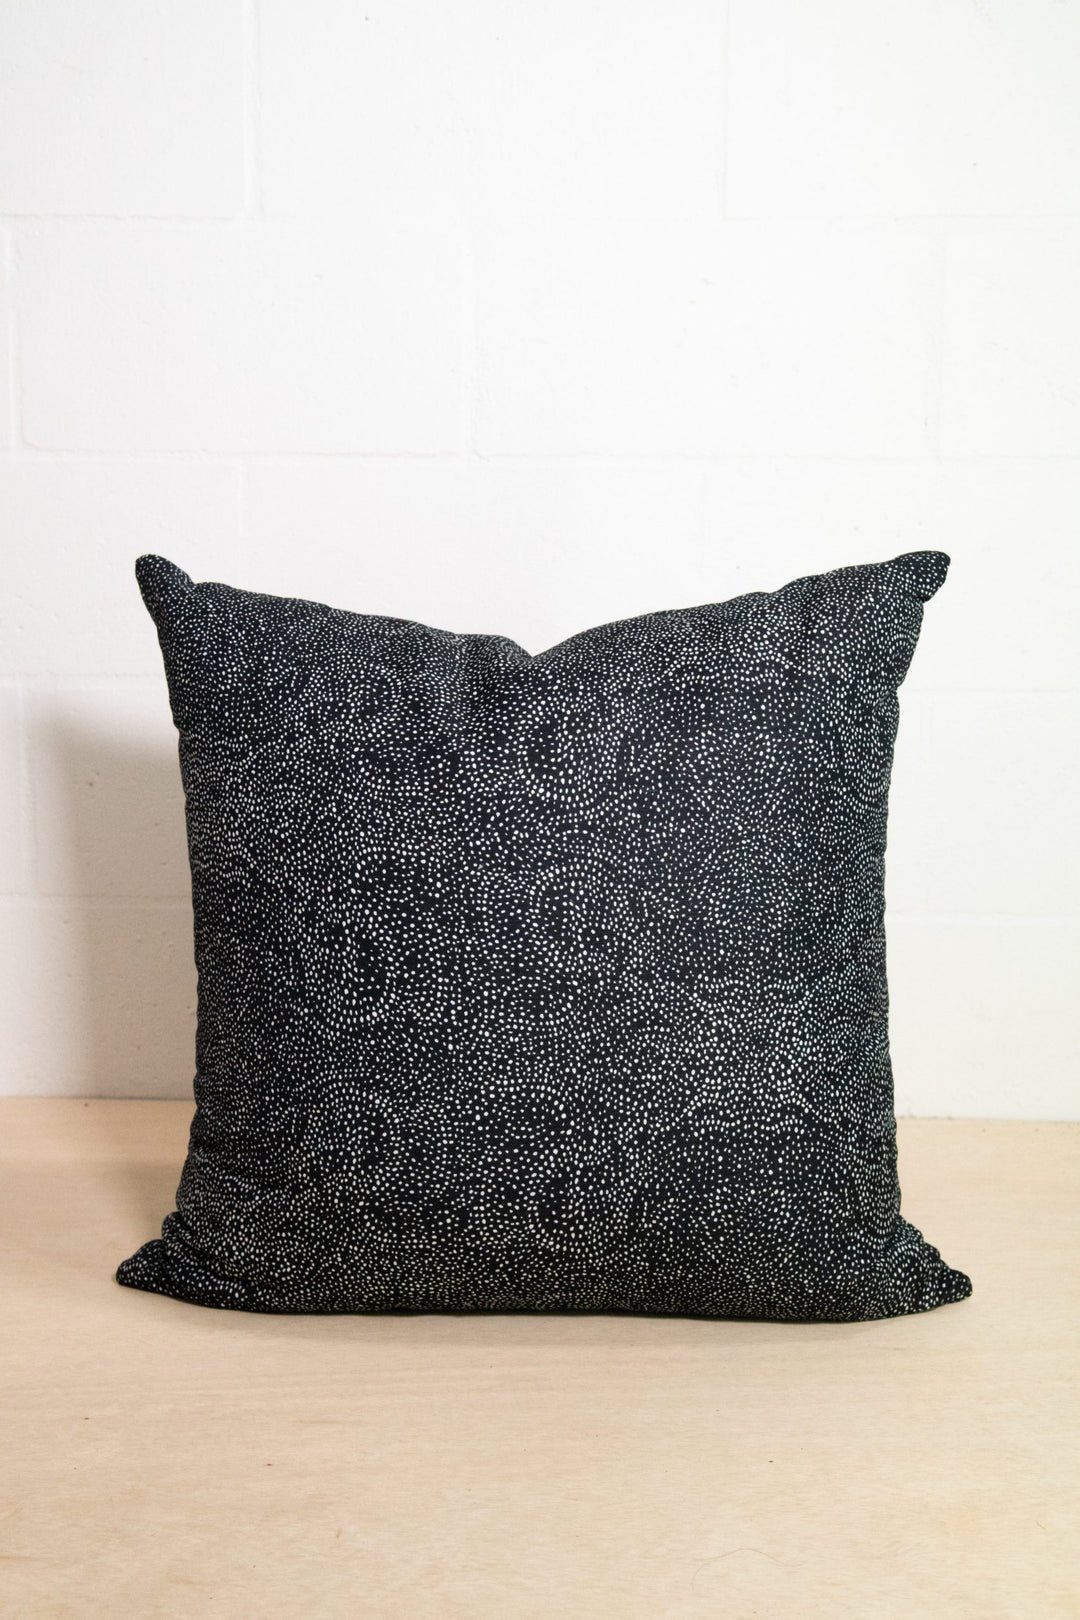 Palizada in Constellation 24" x 24" Pillow